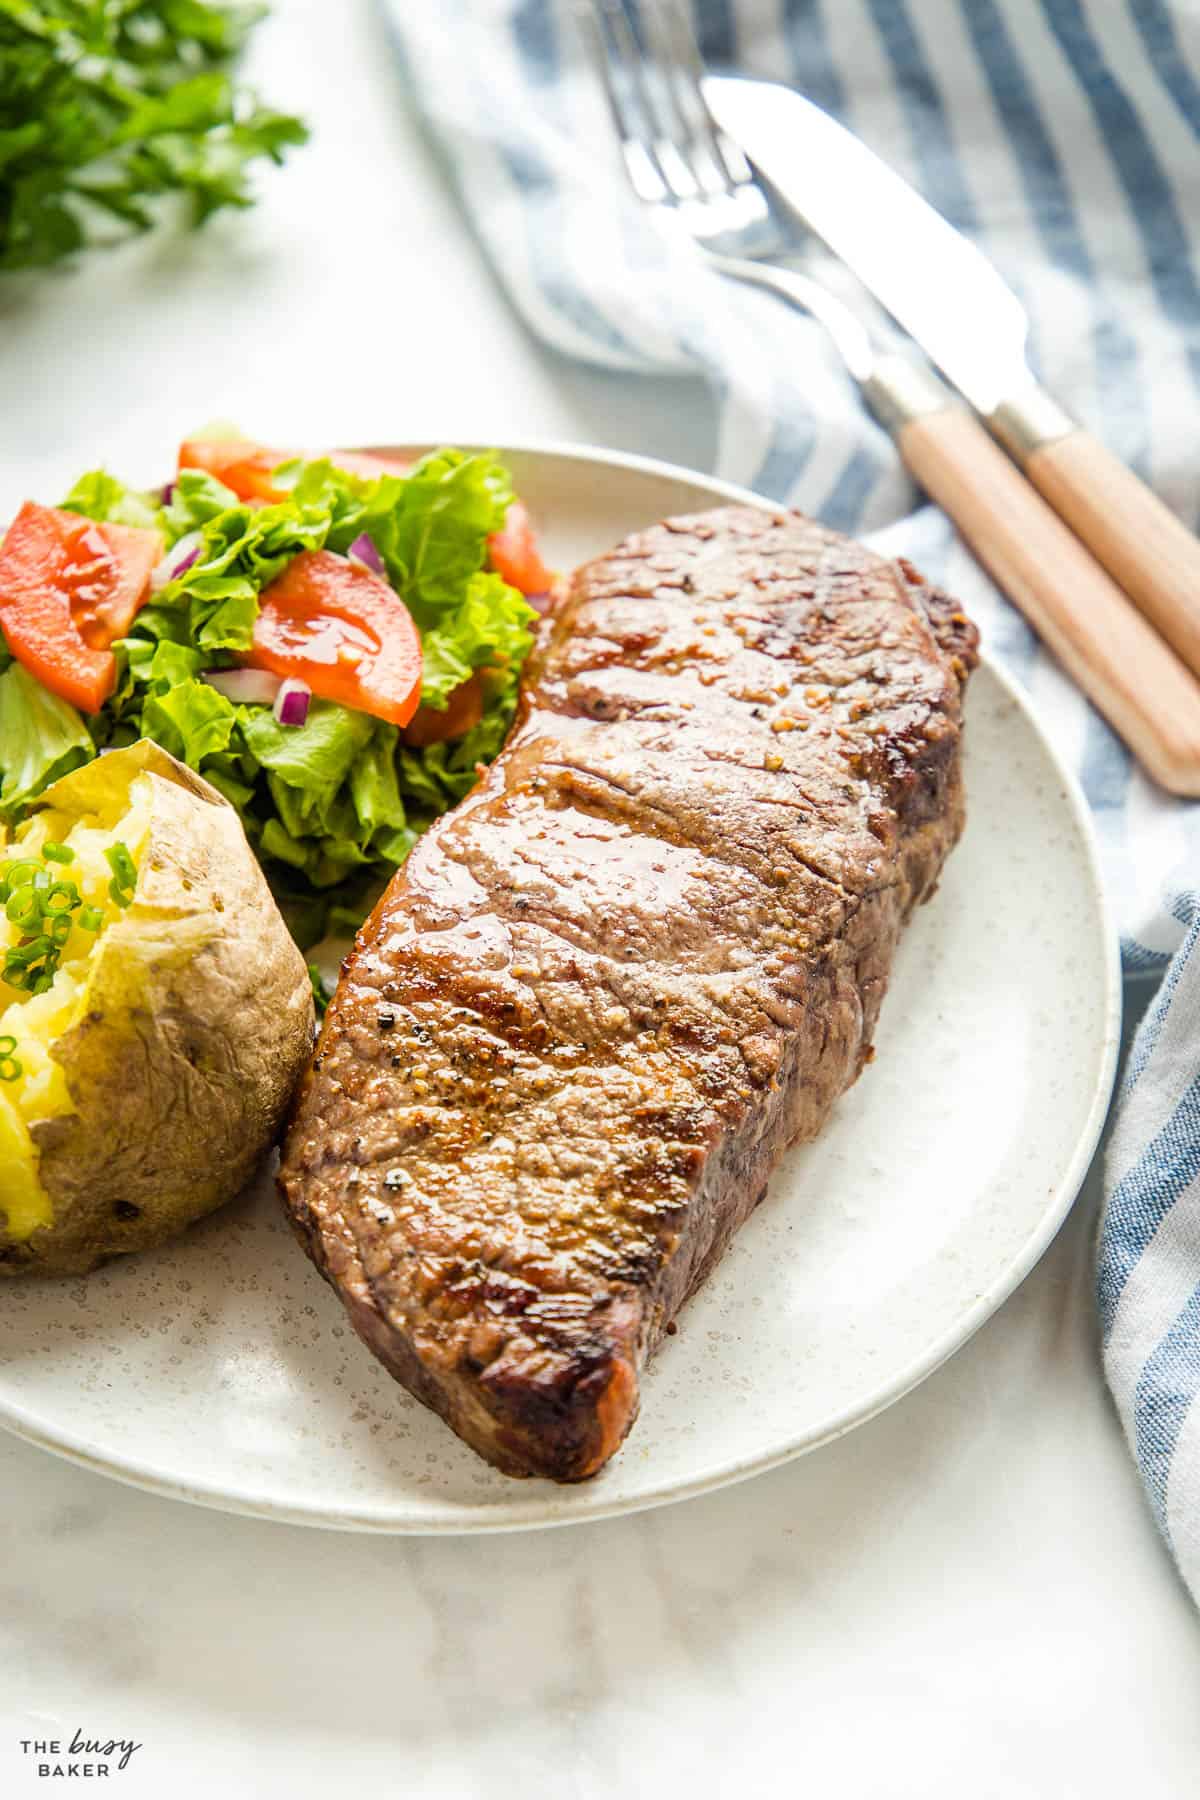 sirloin steak on plate with baked potato and salad